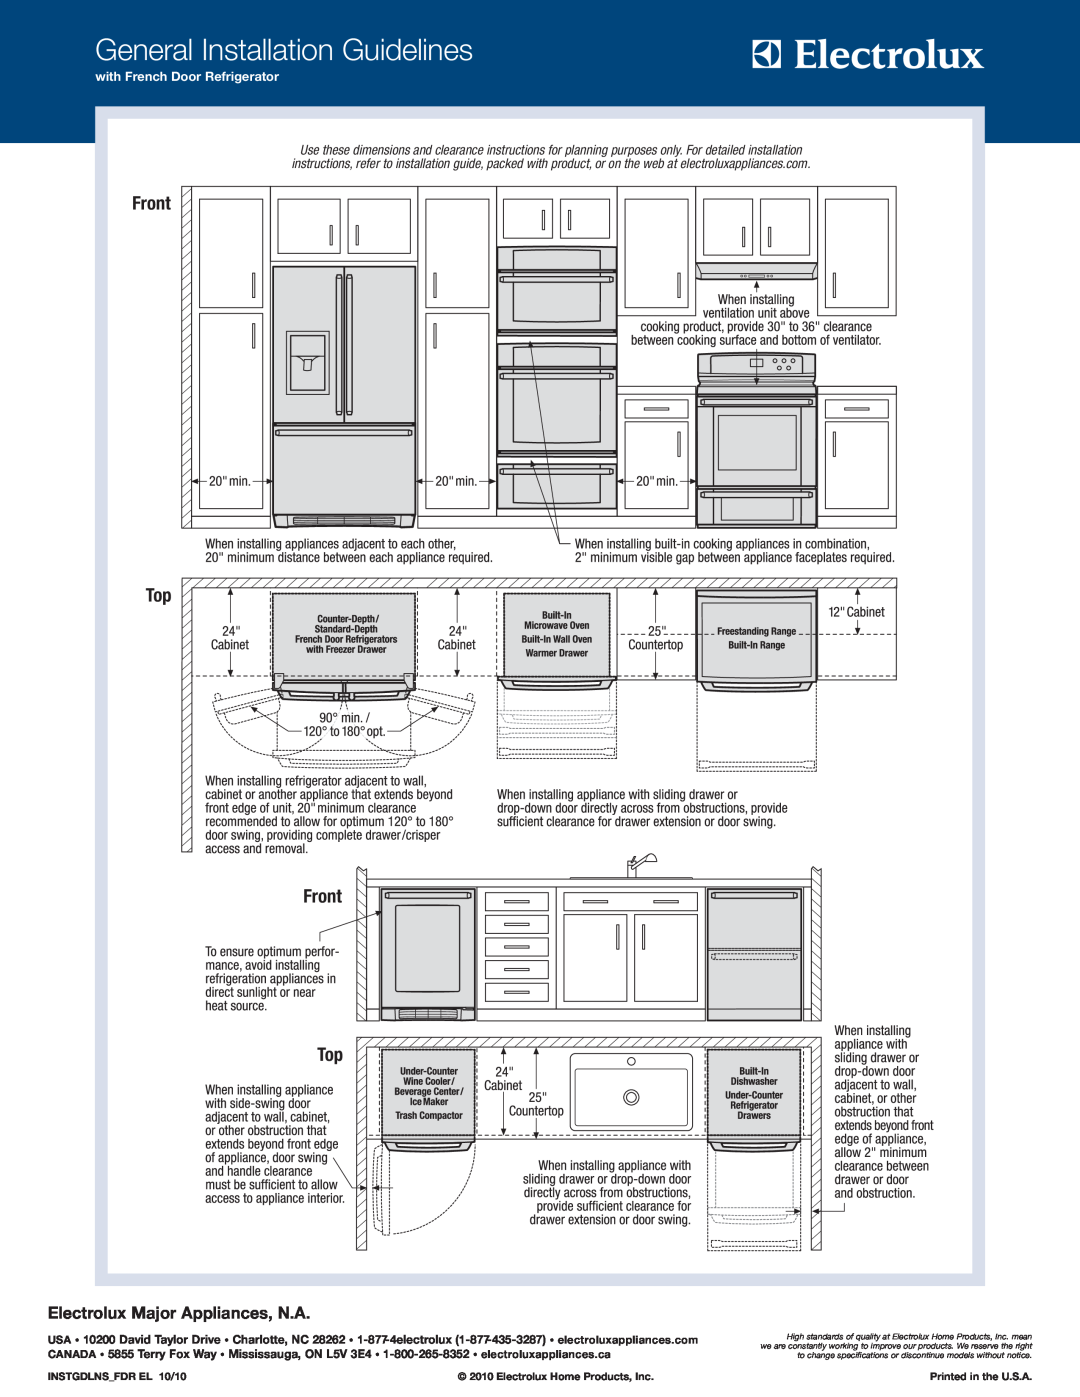 Electrolux EI27BS26J W, EI27BS26J S, EI27BS26J B General Installation Guidelines, Electrolux Major Appliances, N.A, Front 